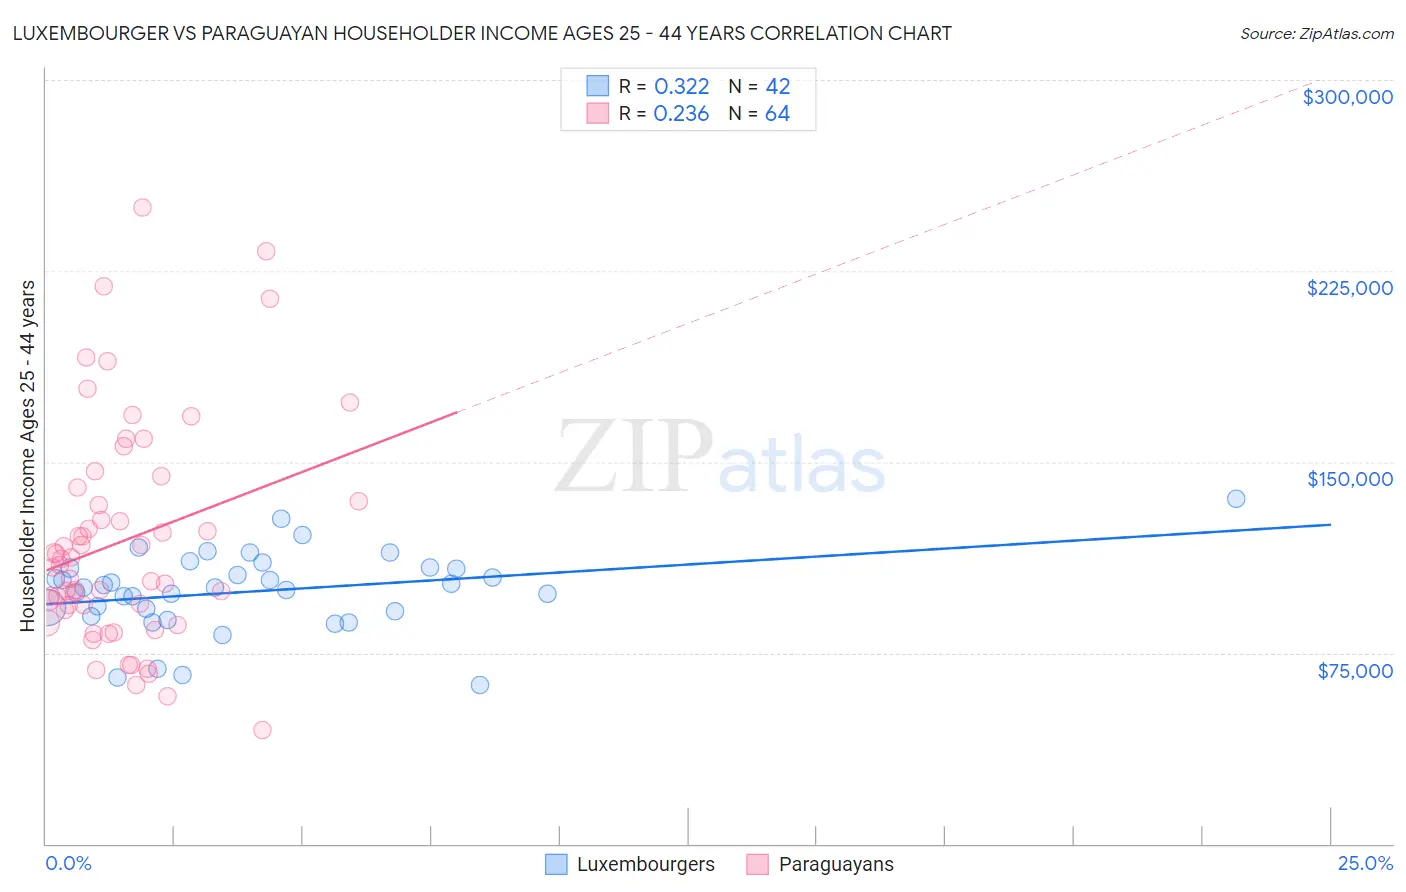 Luxembourger vs Paraguayan Householder Income Ages 25 - 44 years